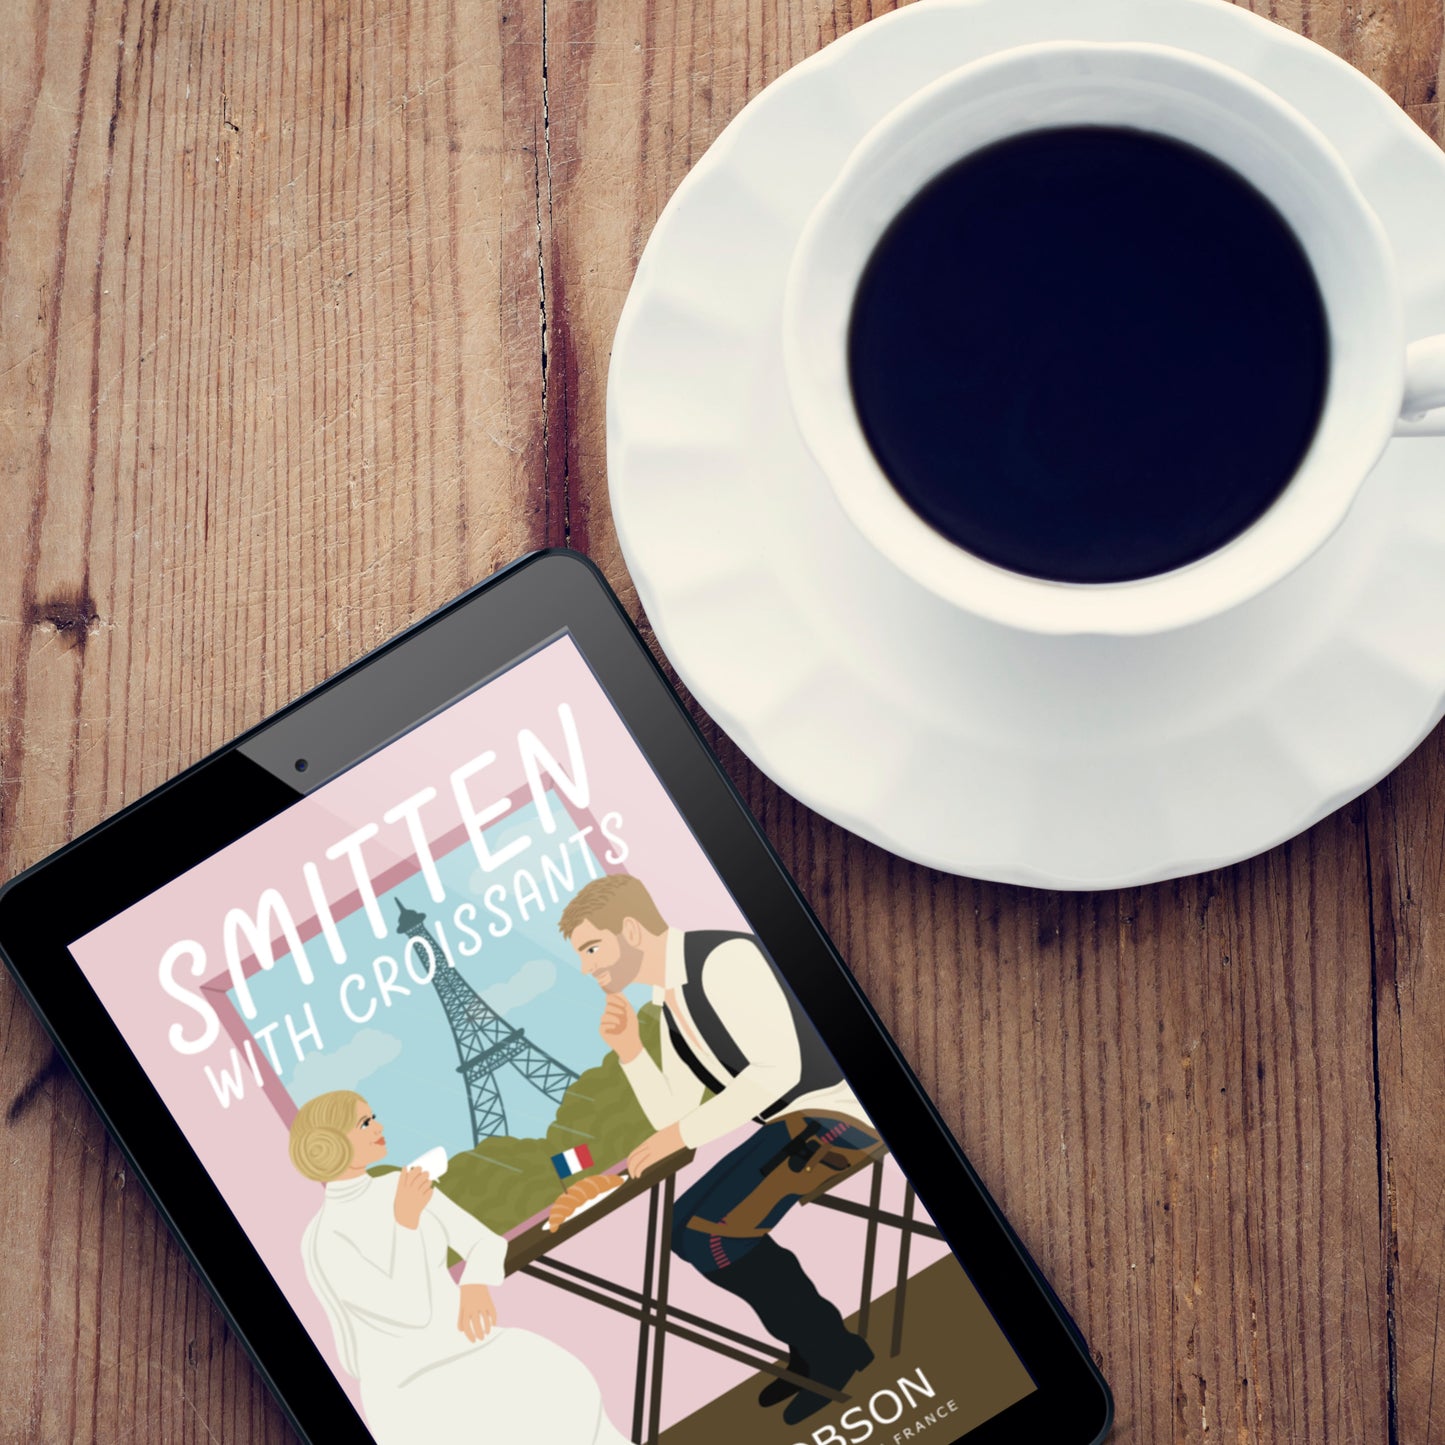 Smitten with Croissants ebook next to white coffee cup